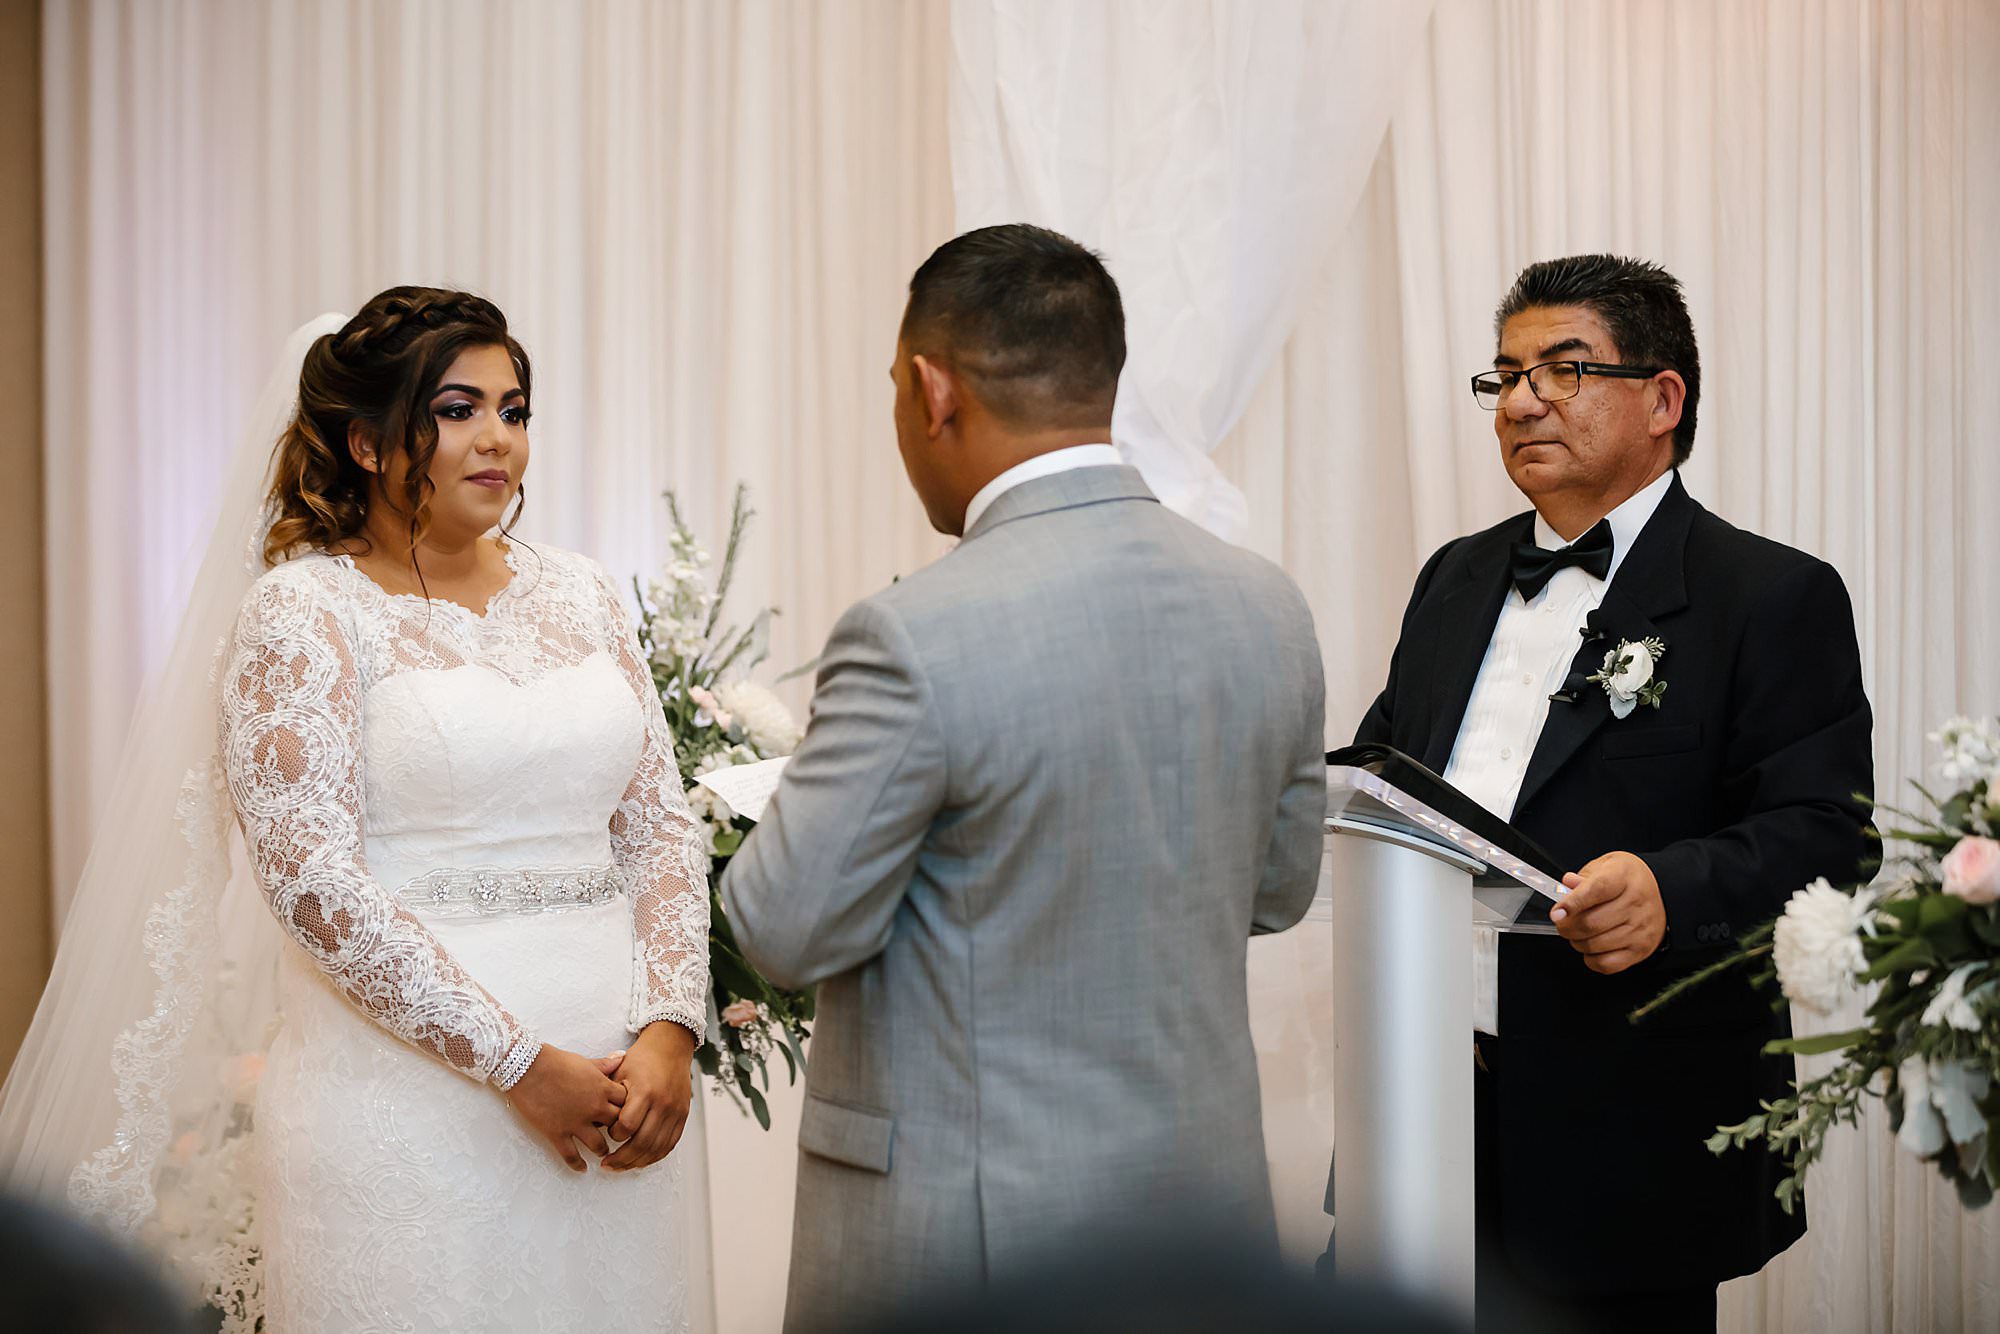 Bride trying not to cry listening to grooms vow